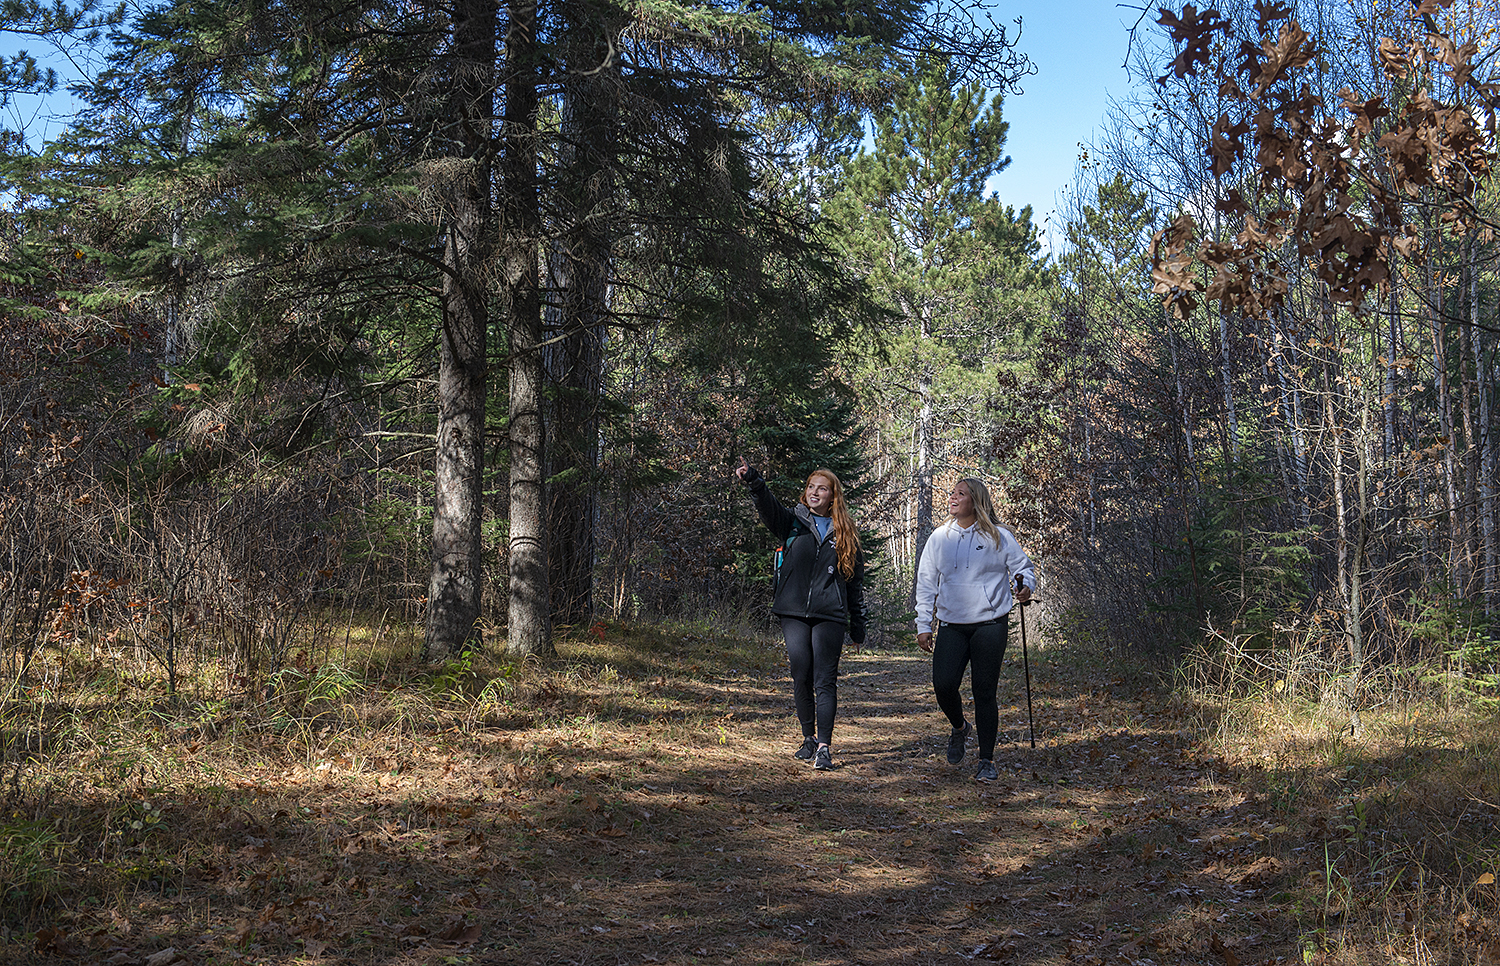 Two Bemidji State students walking through evergreen forest